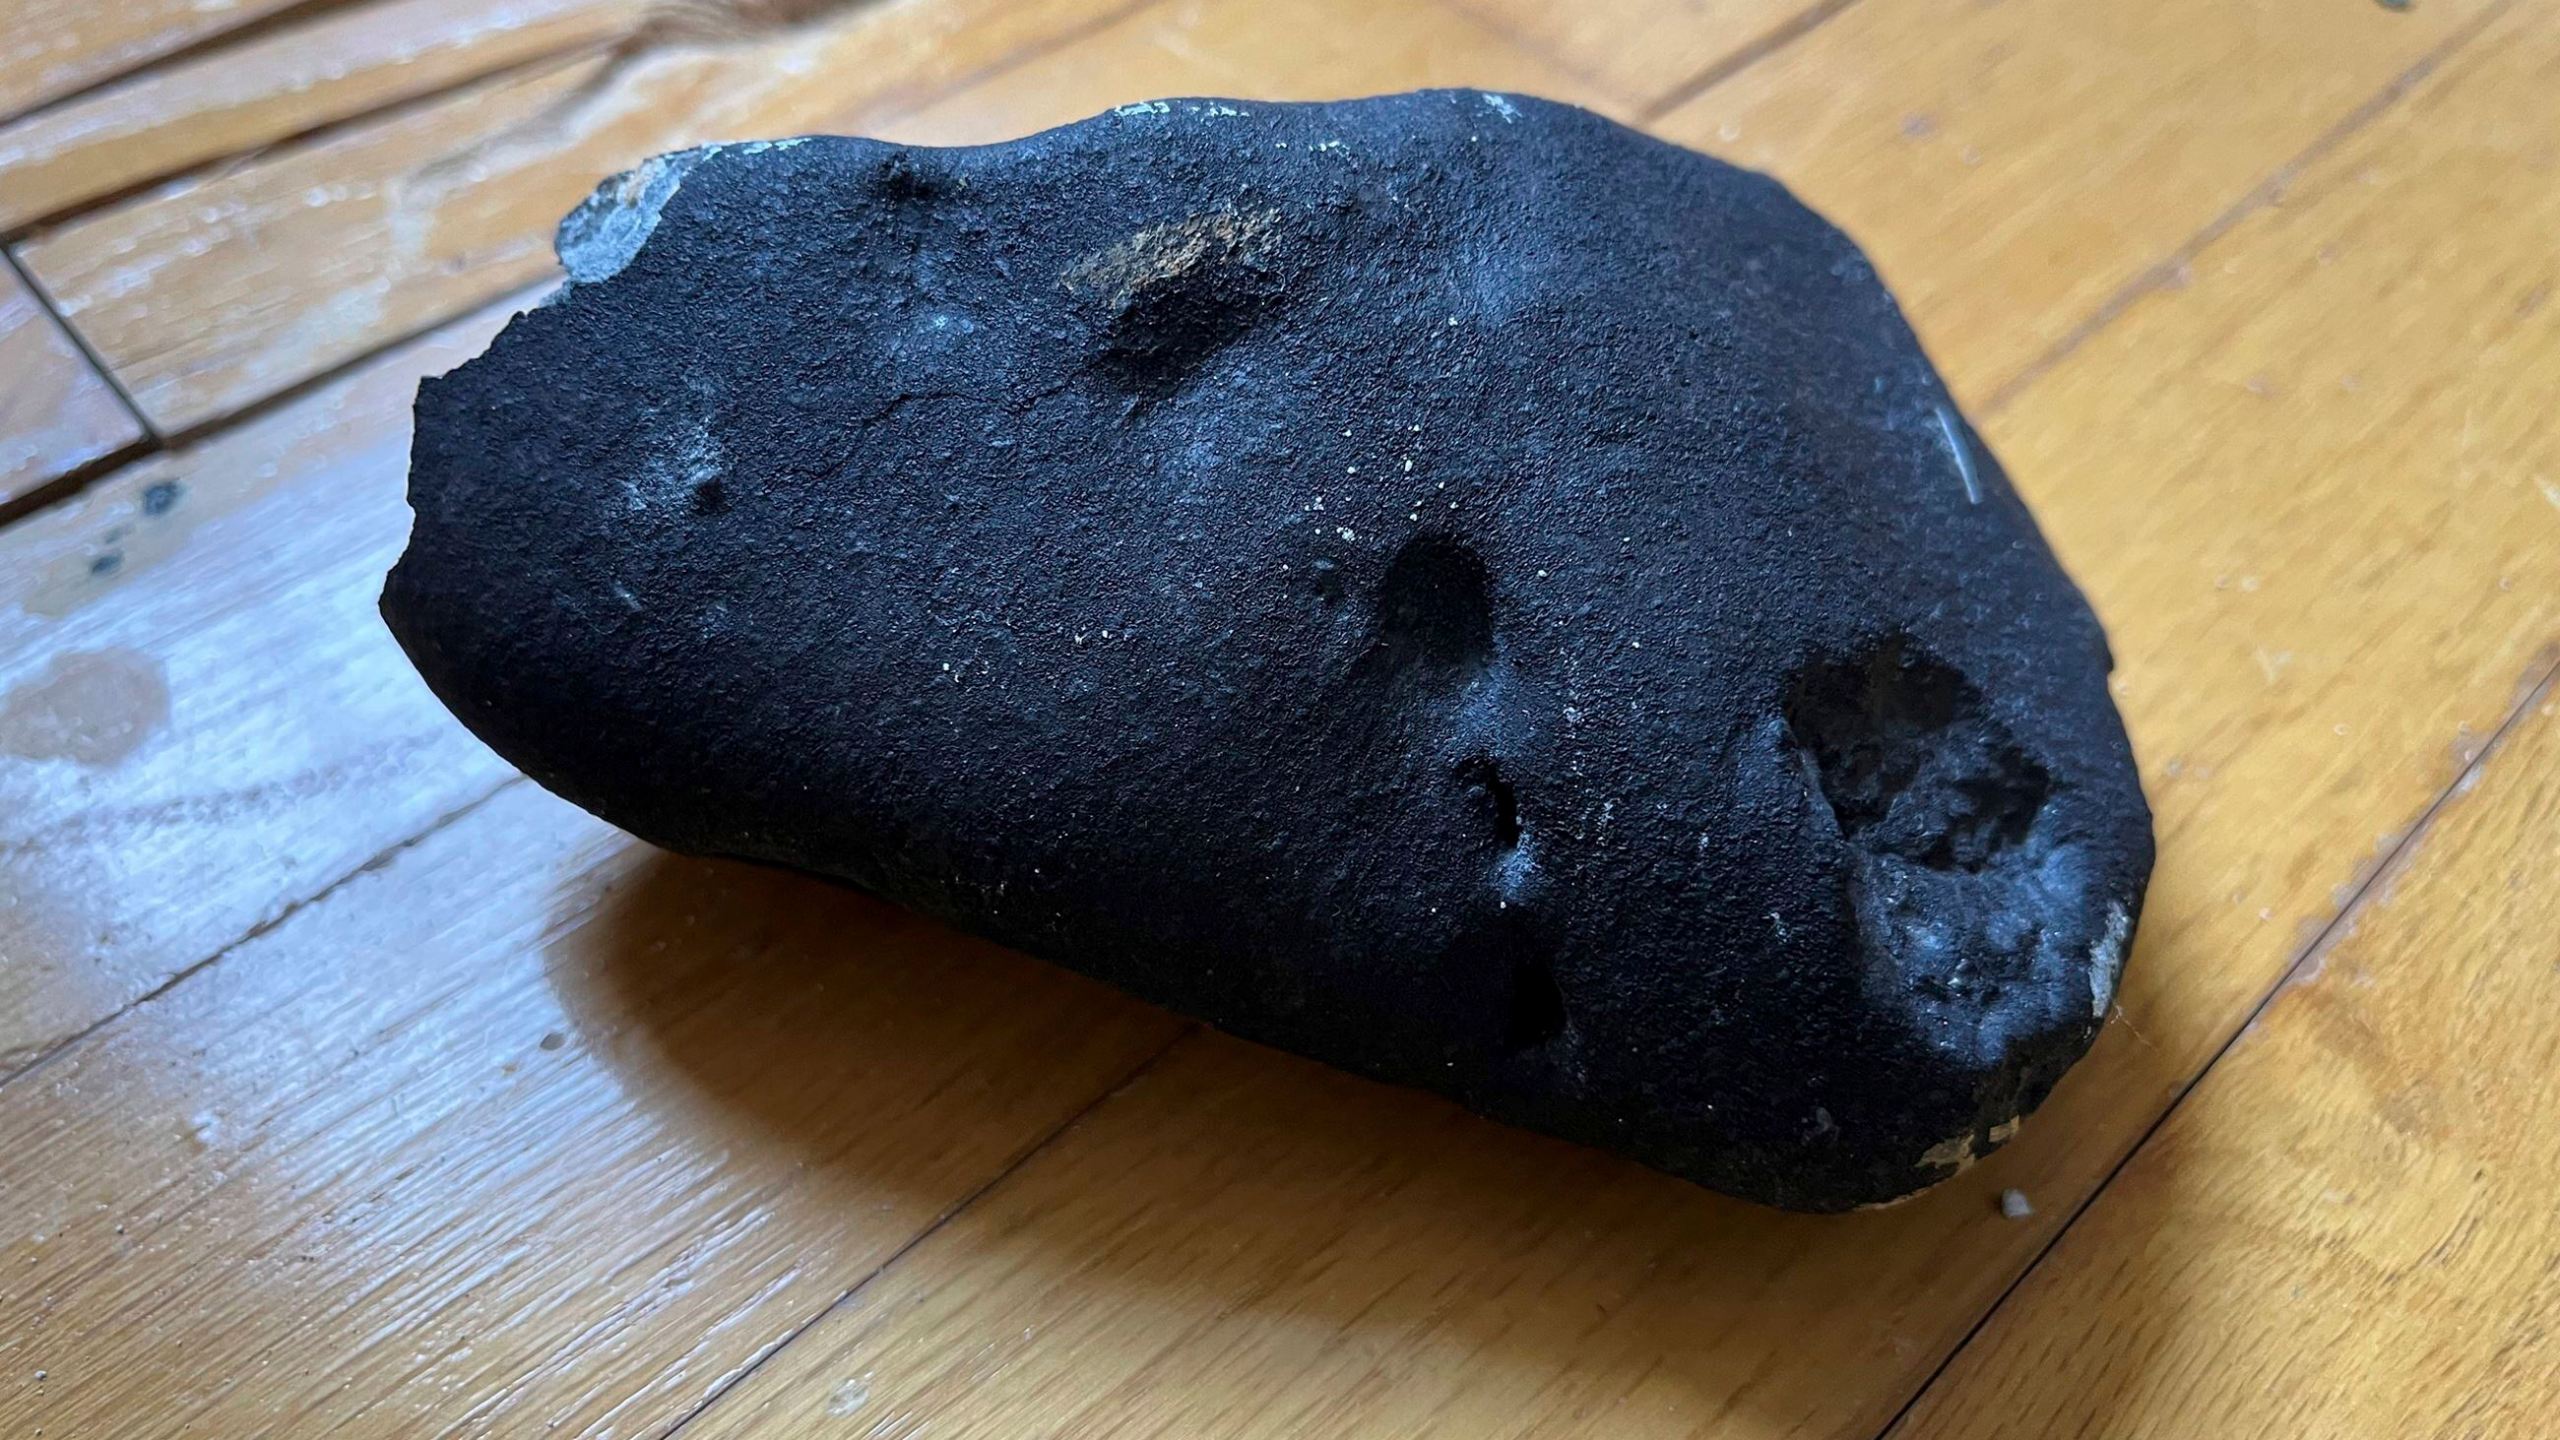 This image provided by Hopewell Township Police Department shows a metallic object believed to be a meteorite that struck the roof a residence in Hopewell Township, N.J. Hopewell Township police said the 4- by-6-inch, oblong-shaped object struck the ranch-style home on Monday, May 8, 2023 and eventually came to rest on a floor. It's estimated to weigh about four pounds. (Hopewell Township Police Department via AP)